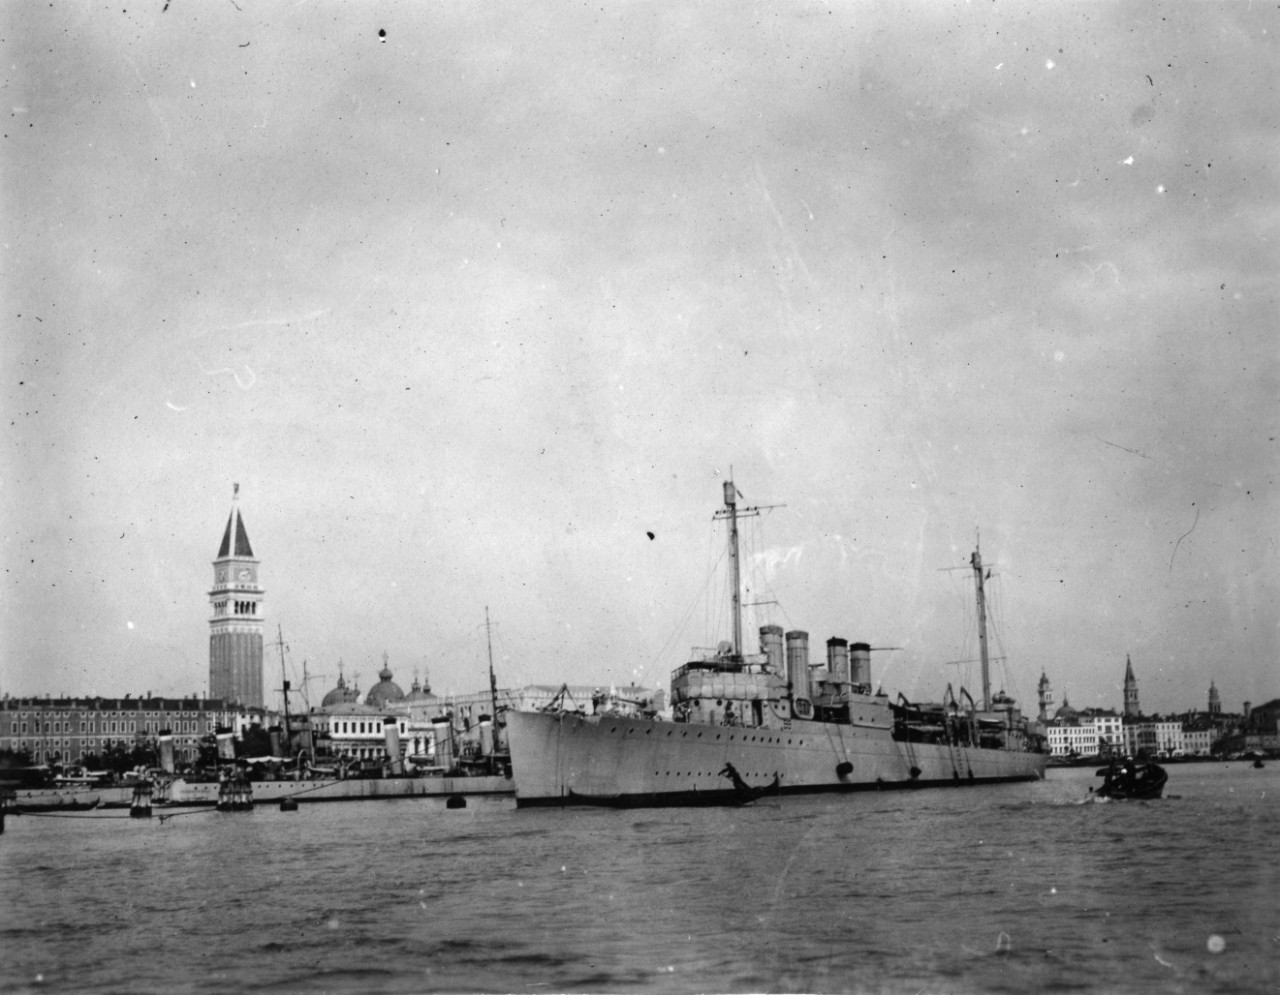 Approximately 160 images taken in Europe, circa 1919-1922.Rear Admiral Mark Bristol; Admiral William Benson; Admiral William Sims; captured German war material; Dalmatian Coast; Istanbul, Turkey; Venice, Italy; USS Lansdale (DD-101); USS Schley (DD-103); USS Ringgold (DD-89); destroyers on convoy duty during World War I; USS Western Light (SP-3300); USS Mercer (SP-3837); USS Scorpion (PY-3); USS Canibas (SP-3401); Antwerp, Belgium; Curtiss H-12 or H-16 flying boat; foreign ships including Radetzky (Austrian), Nino Bixio (Italian), Sultan Selim (Turkish), Temeraire (British), Condorcet (French), Lord Nelson (British); refugee camp in France; ruined towns on the French Western Front; Belgium, including harbor scenes and the Waterloo Monument; USN railway guns firing. Most photos do not have captions. Some photos have been assigned NH numbers or were removed to the NH collection.